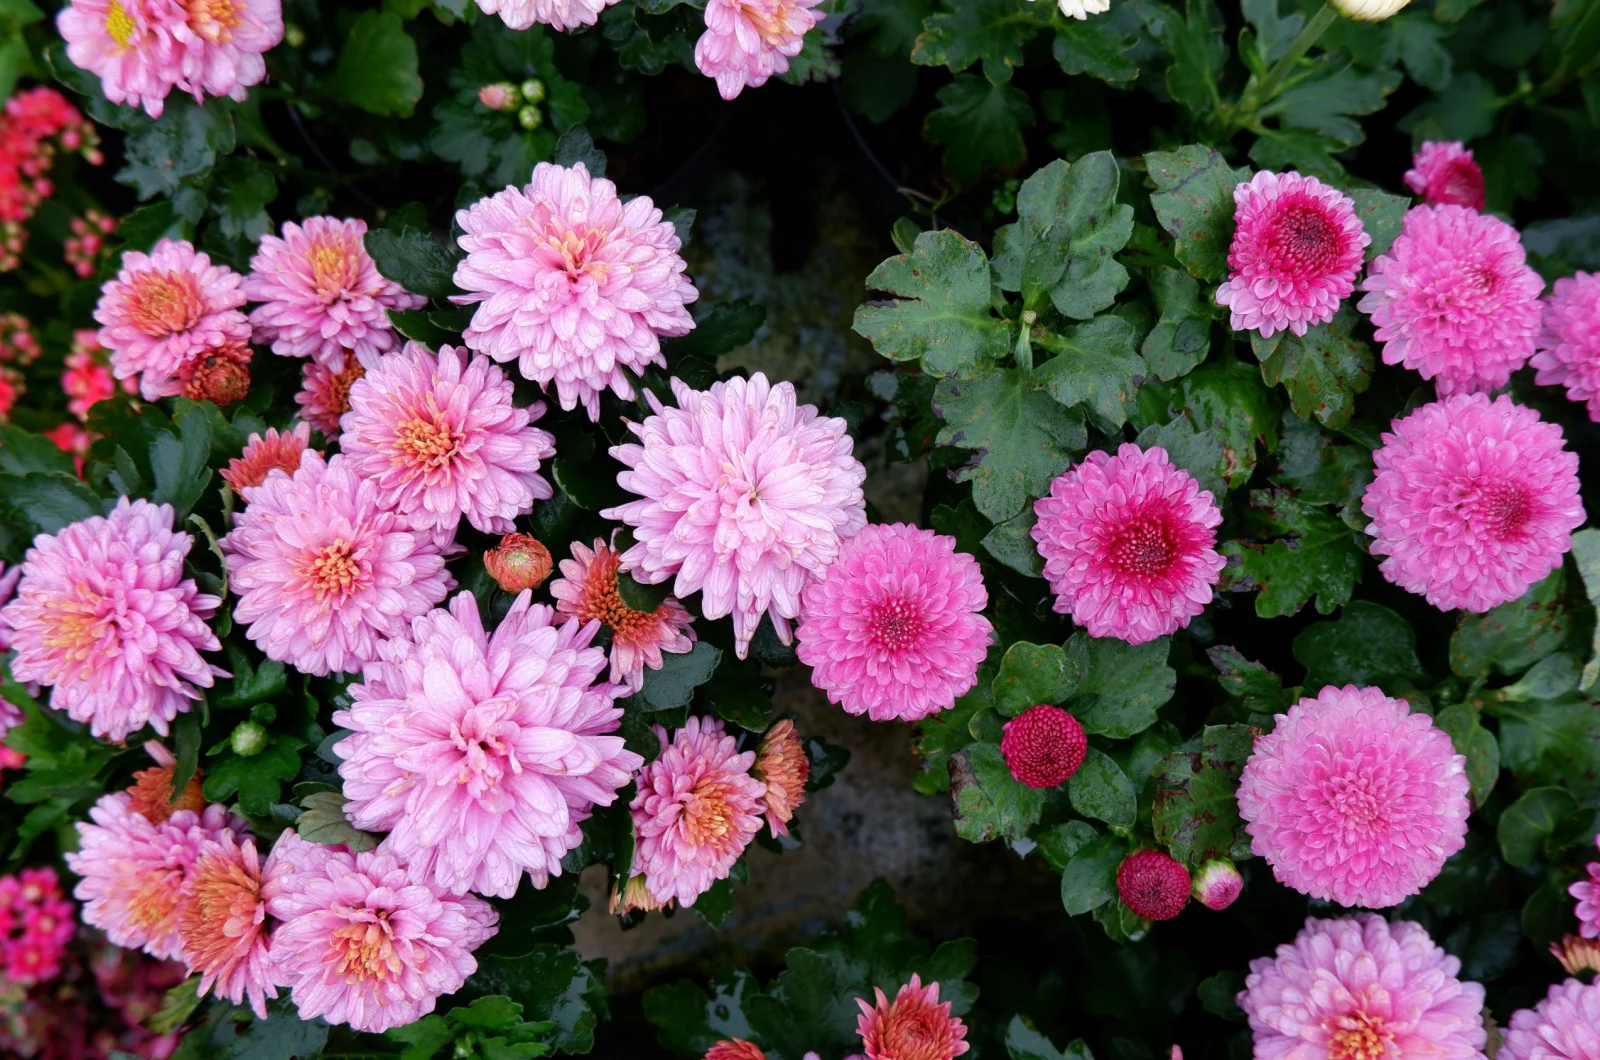 different types and colors of chrysanthemums in a flower garden